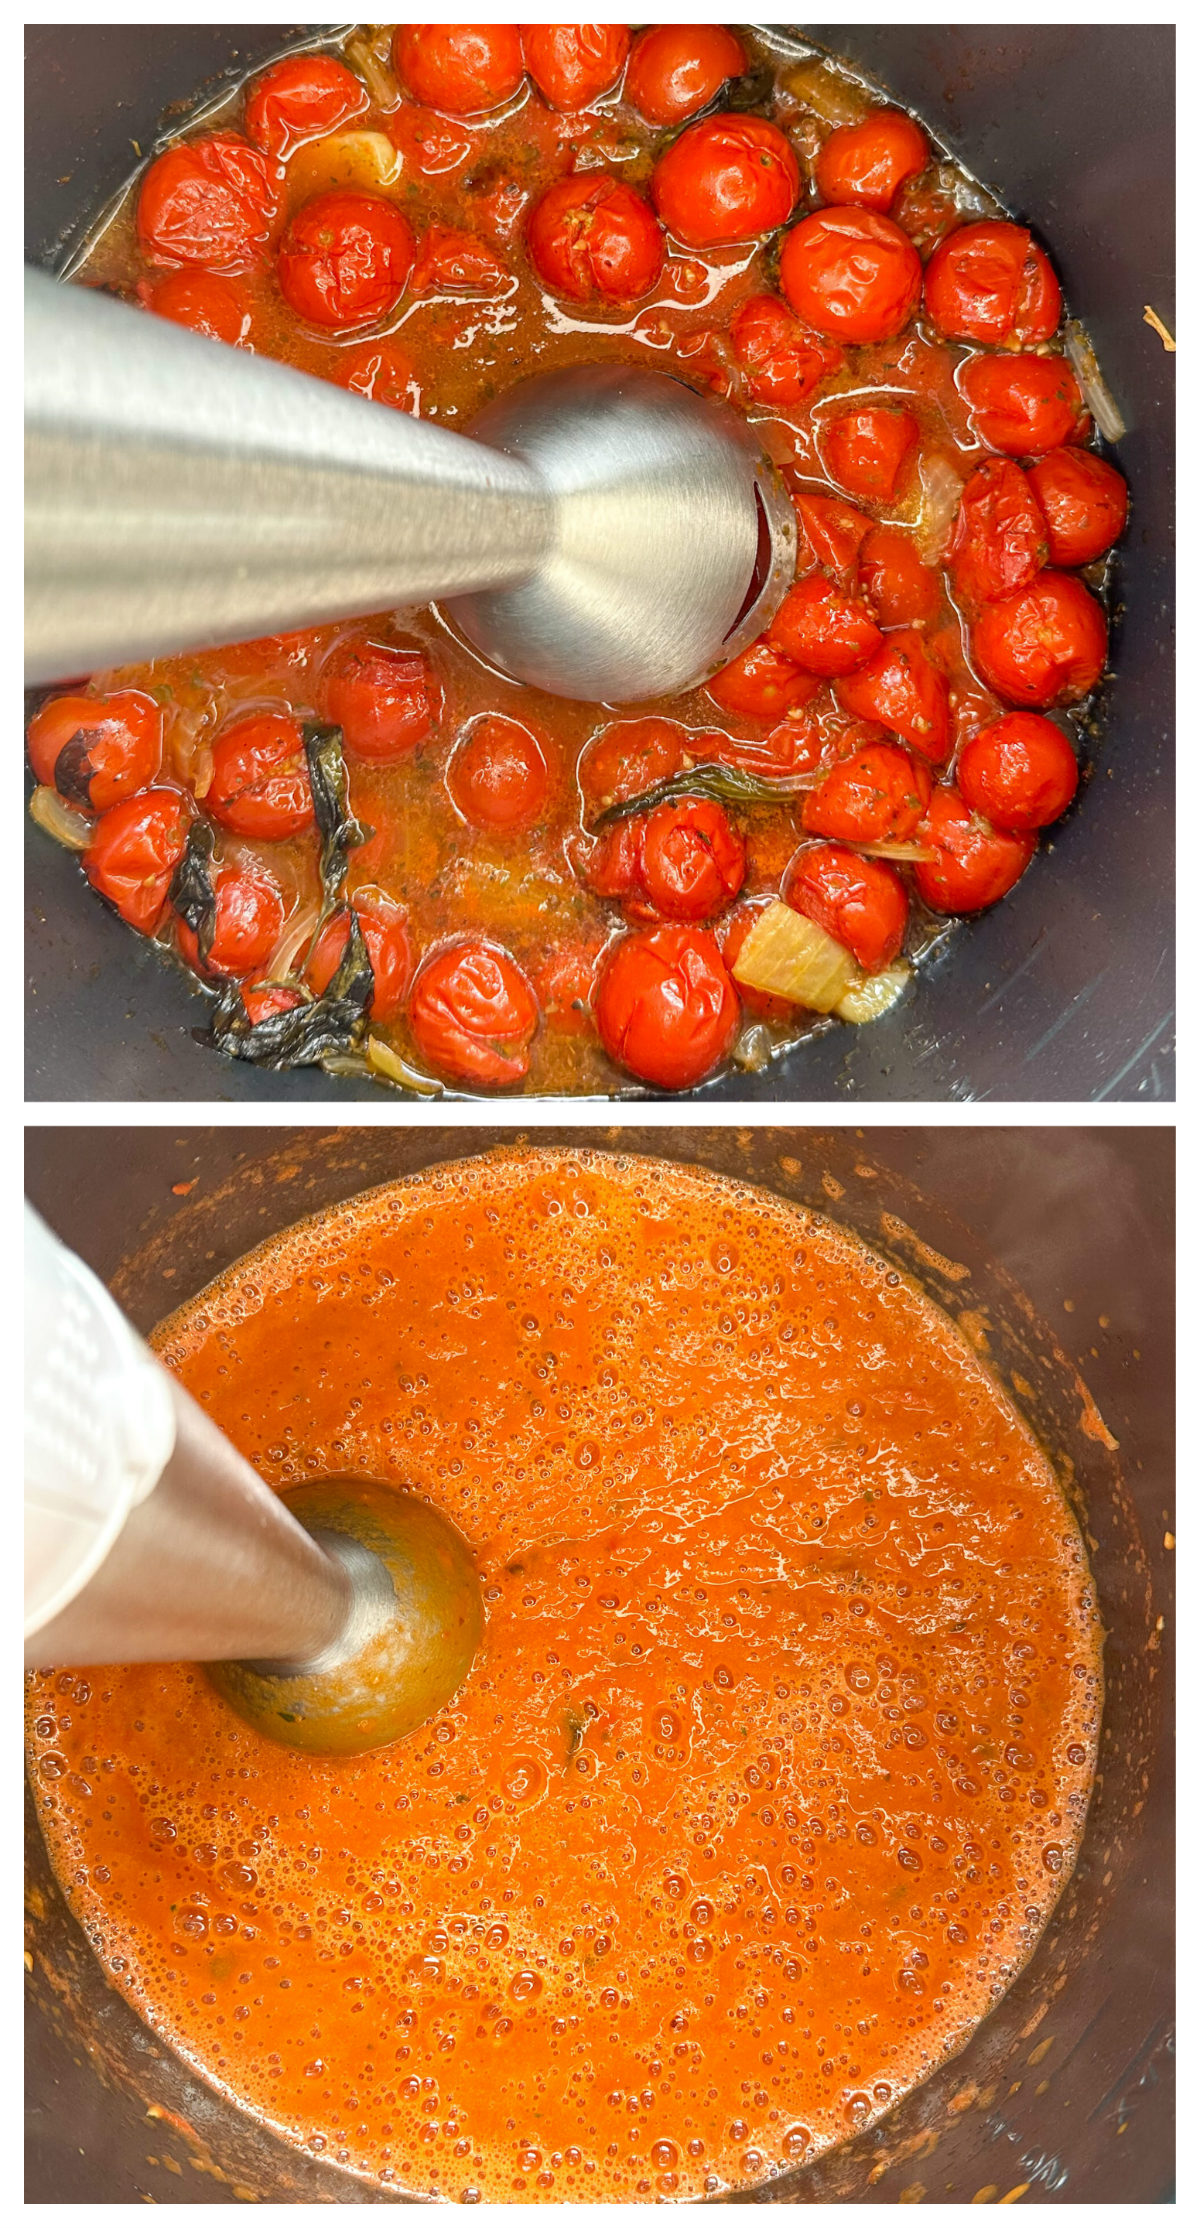 Using a stick immersion blender to blend homemade pasta sauce 